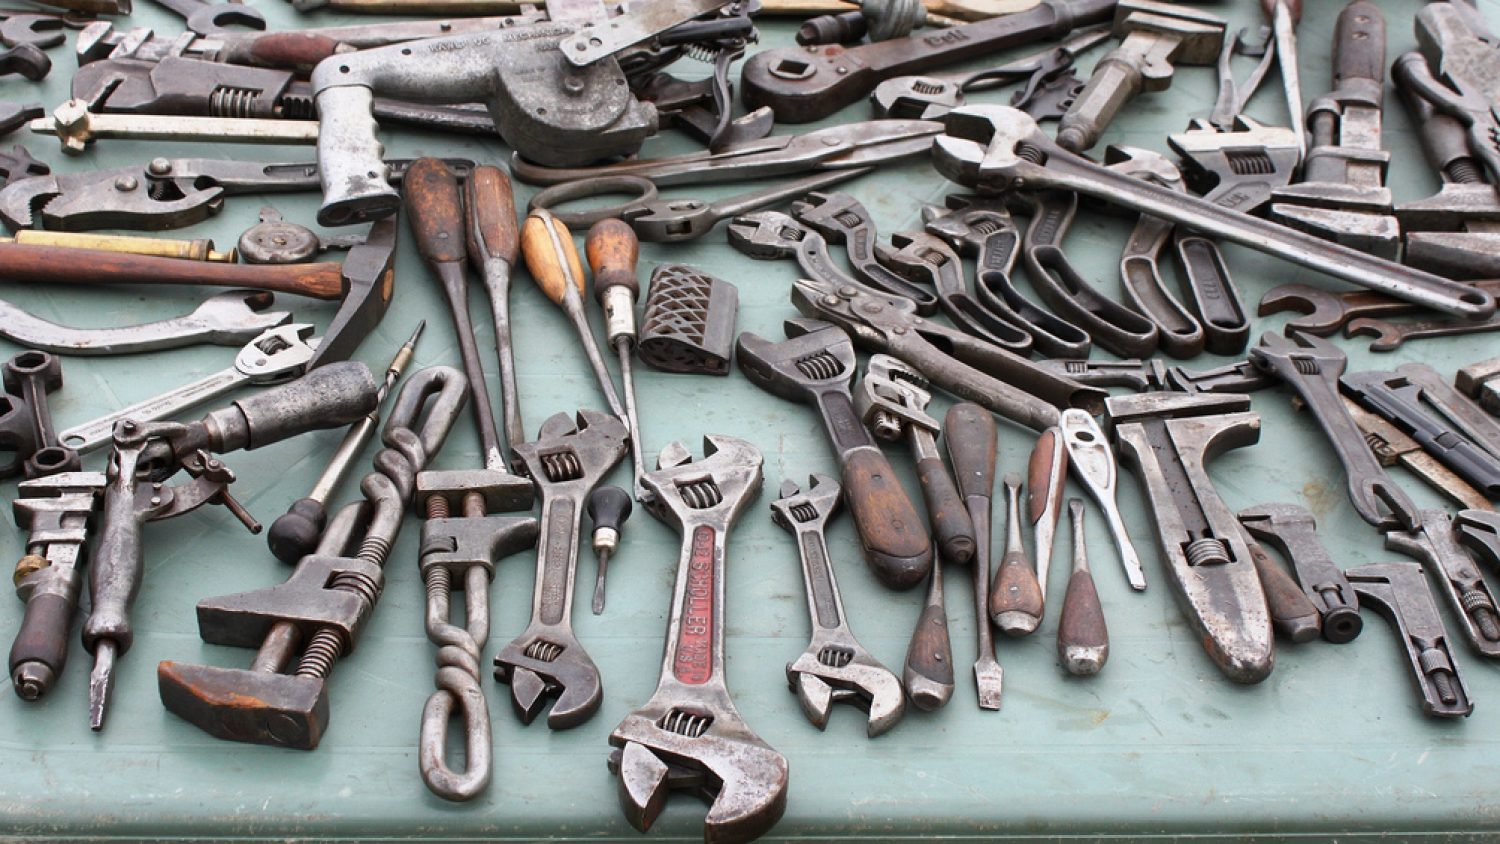 17 Tools to help with Technical SEO